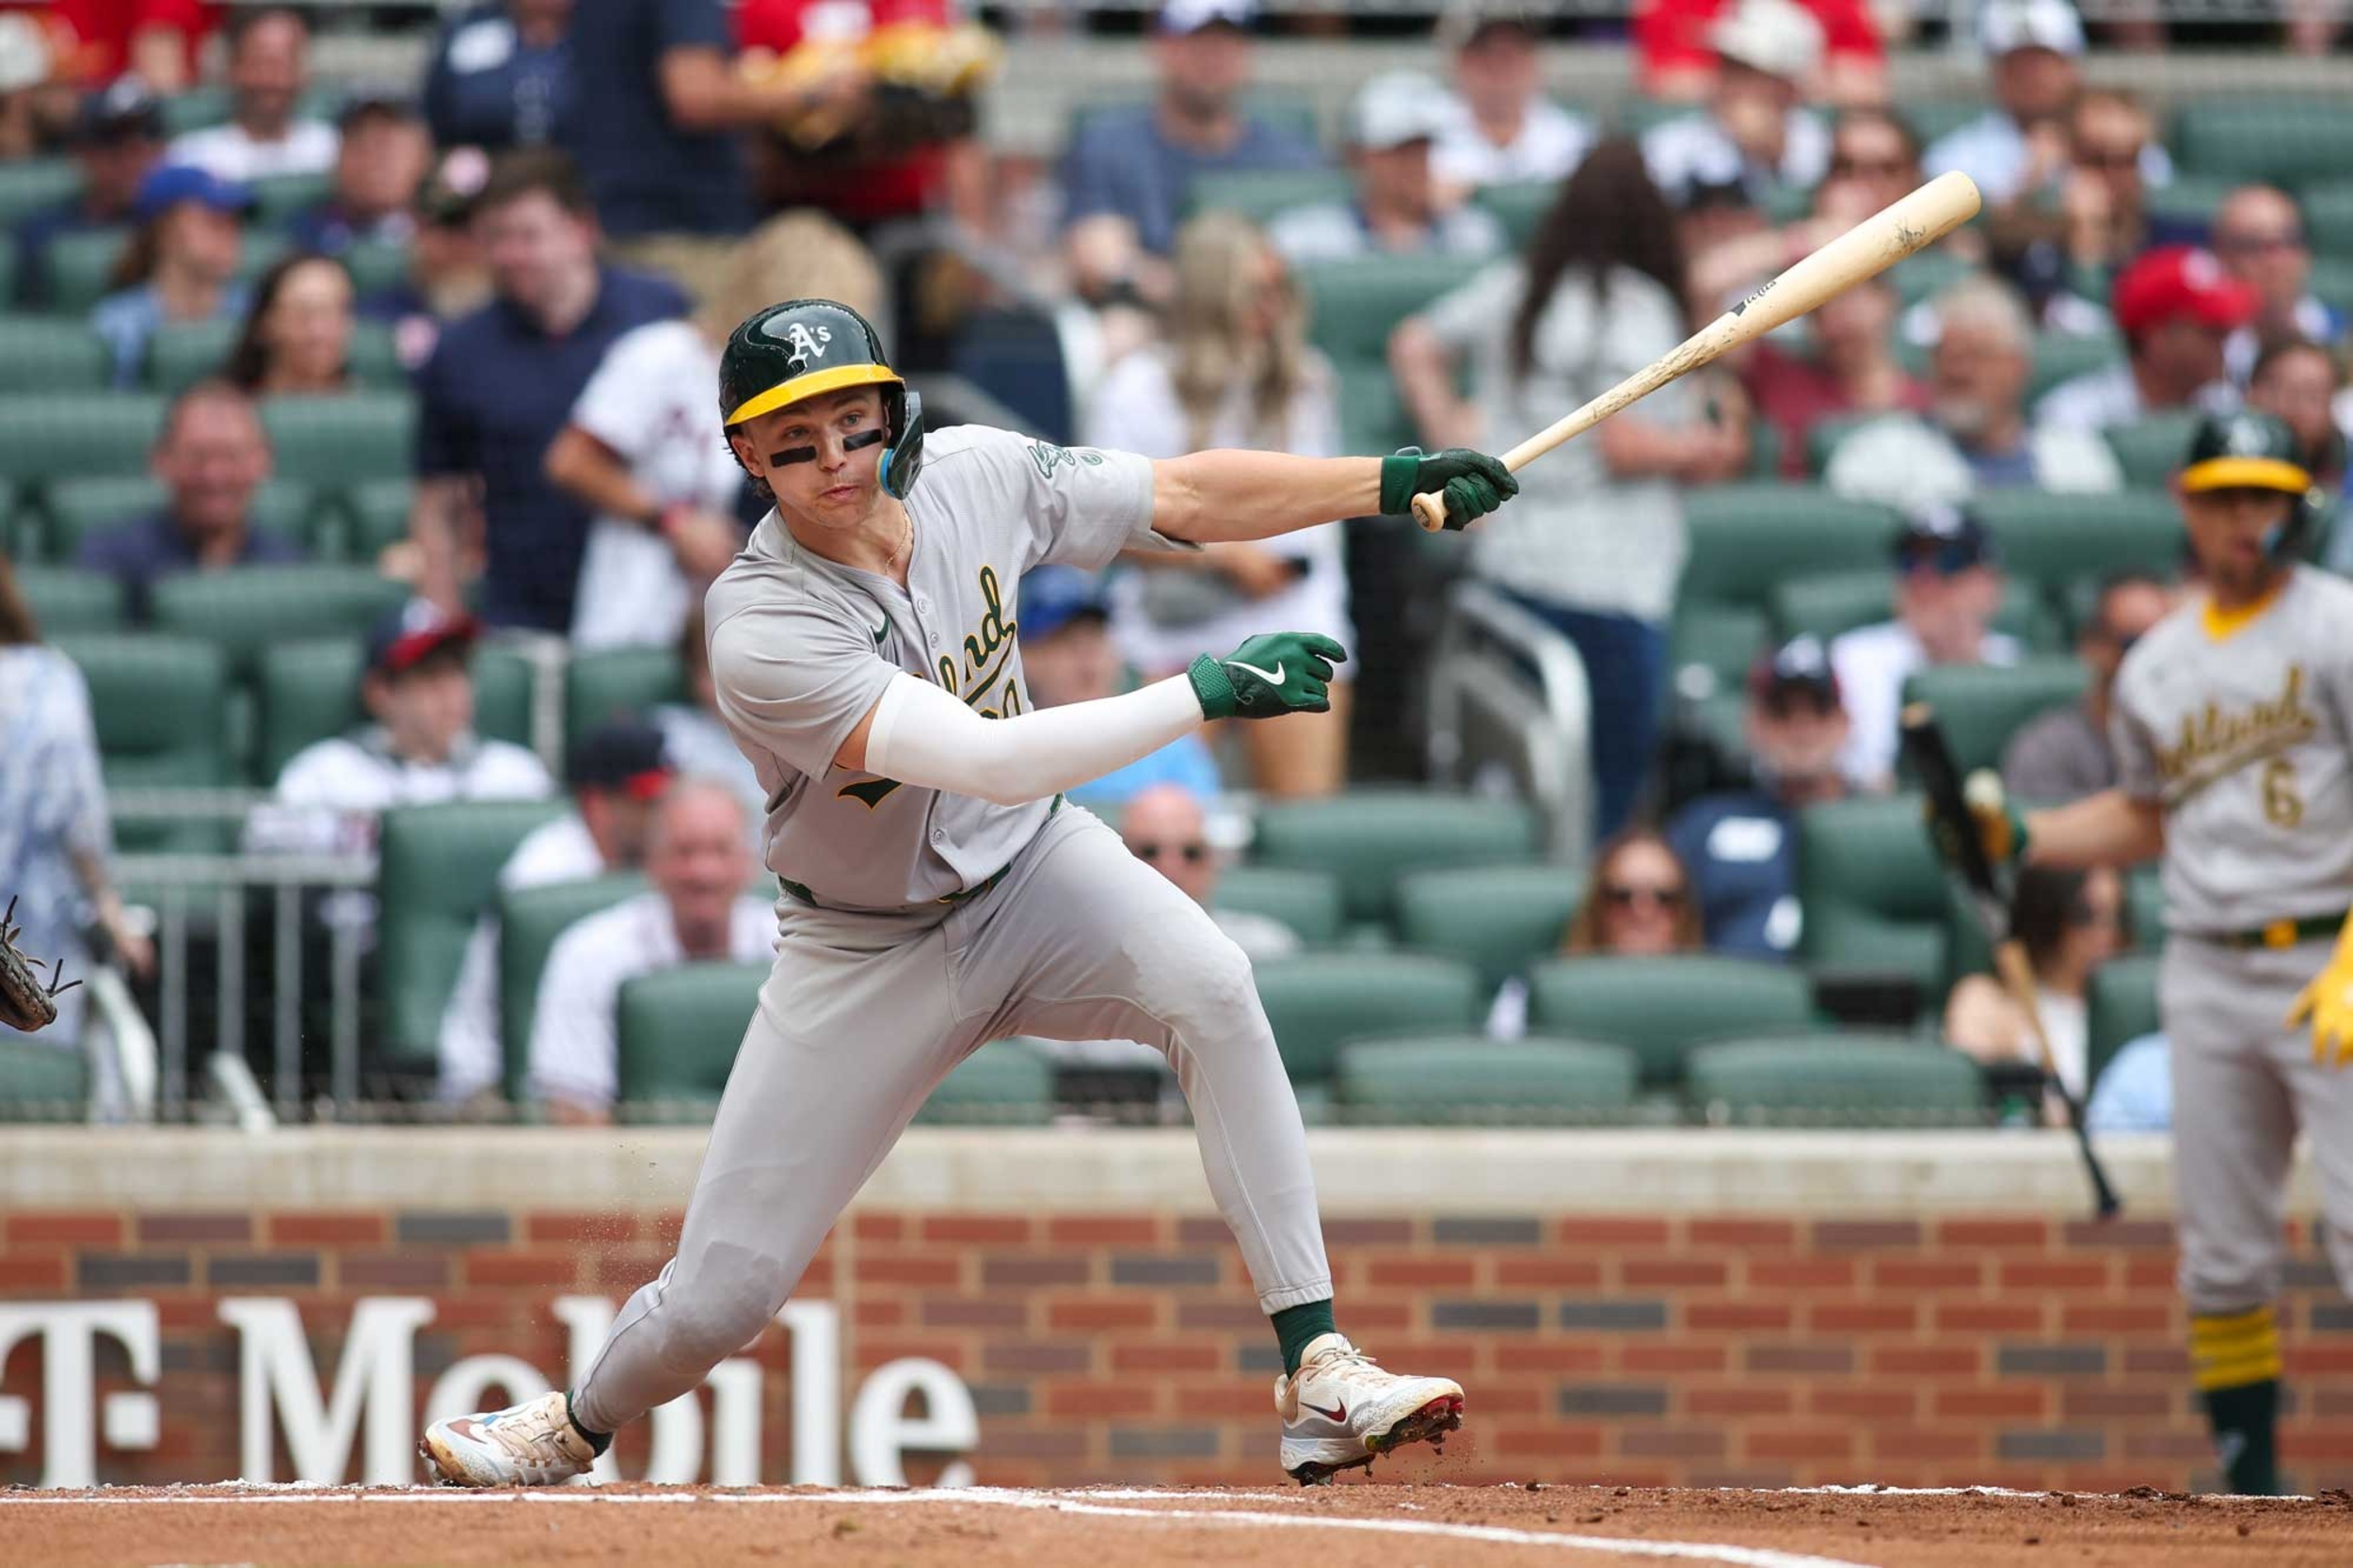 <p>Gelof looked like a foundational player for Oakland last season, hitting .267-14-32 with 14 steals in only 69 games. His bat has yet to get going this season, however, hitting .186-5-13 with six steals in 46 games while also missing time with an oblique strain.</p><p><a href='https://www.msn.com/en-us/community/channel/vid-cj9pqbr0vn9in2b6ddcd8sfgpfq6x6utp44fssrv6mc2gtybw0us'>Follow us on MSN to see more of our exclusive MLB content.</a></p>